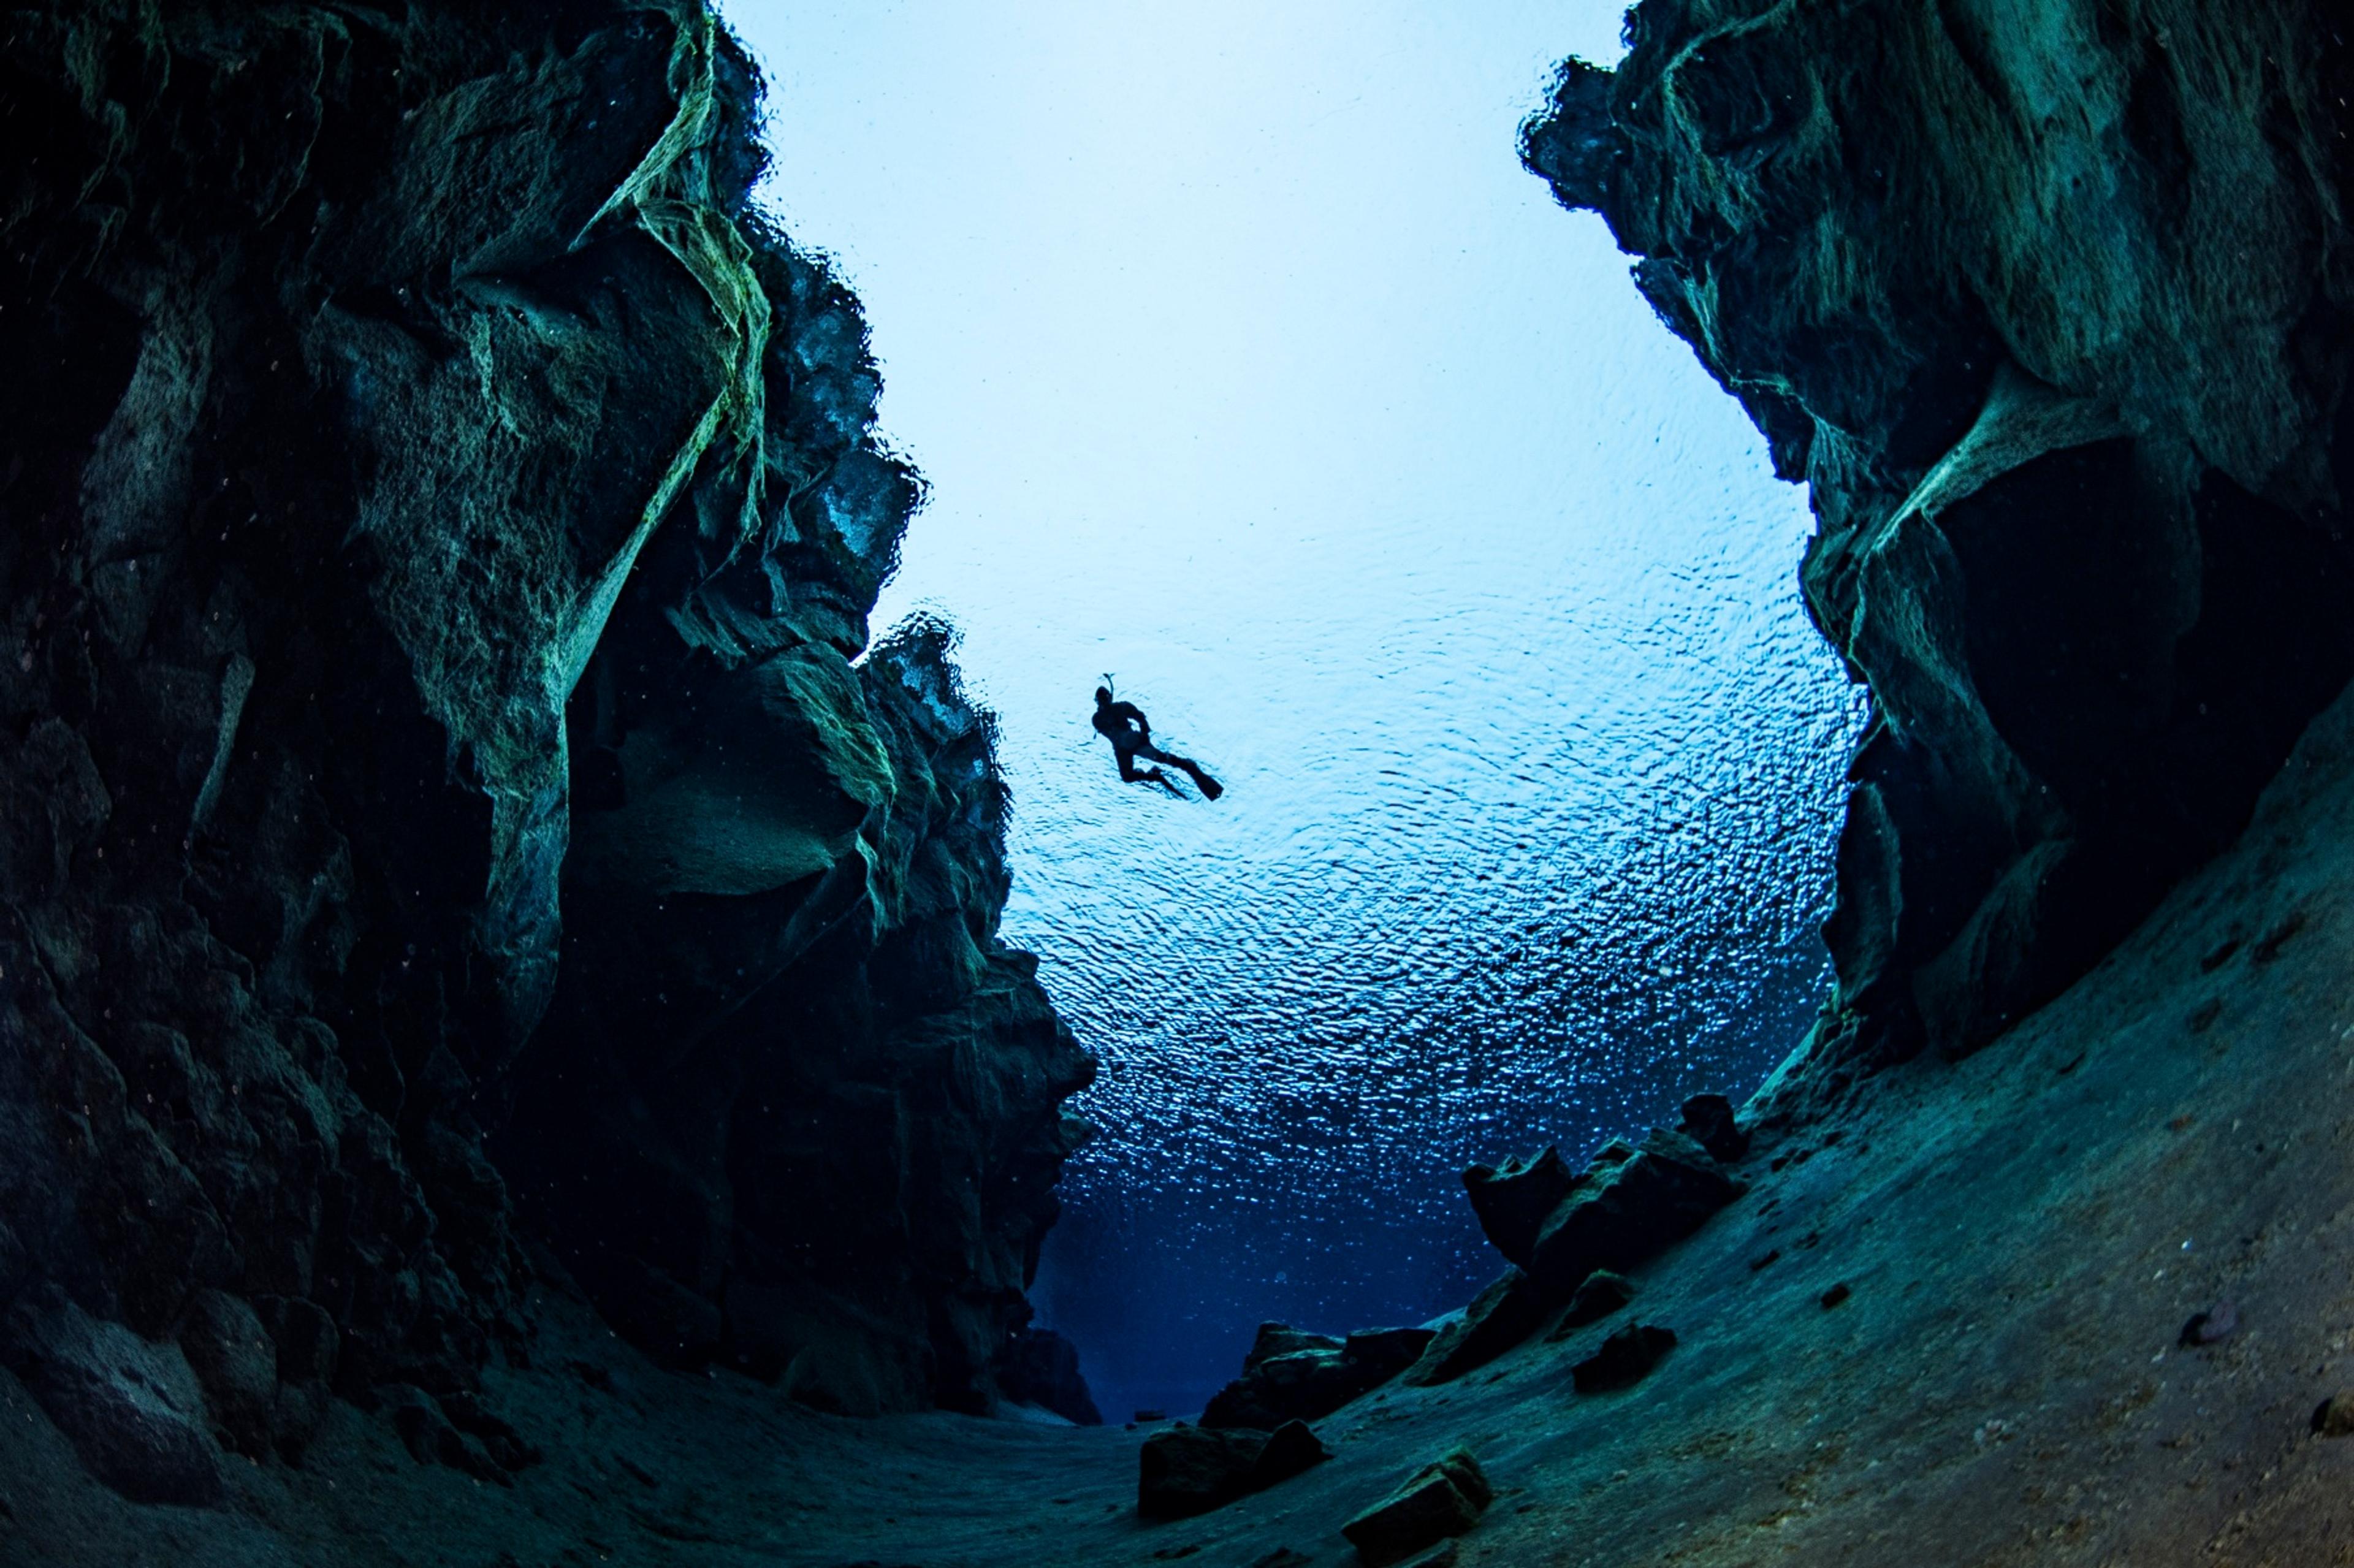 A photo of Silfra fissure. Snorkeler in the background.